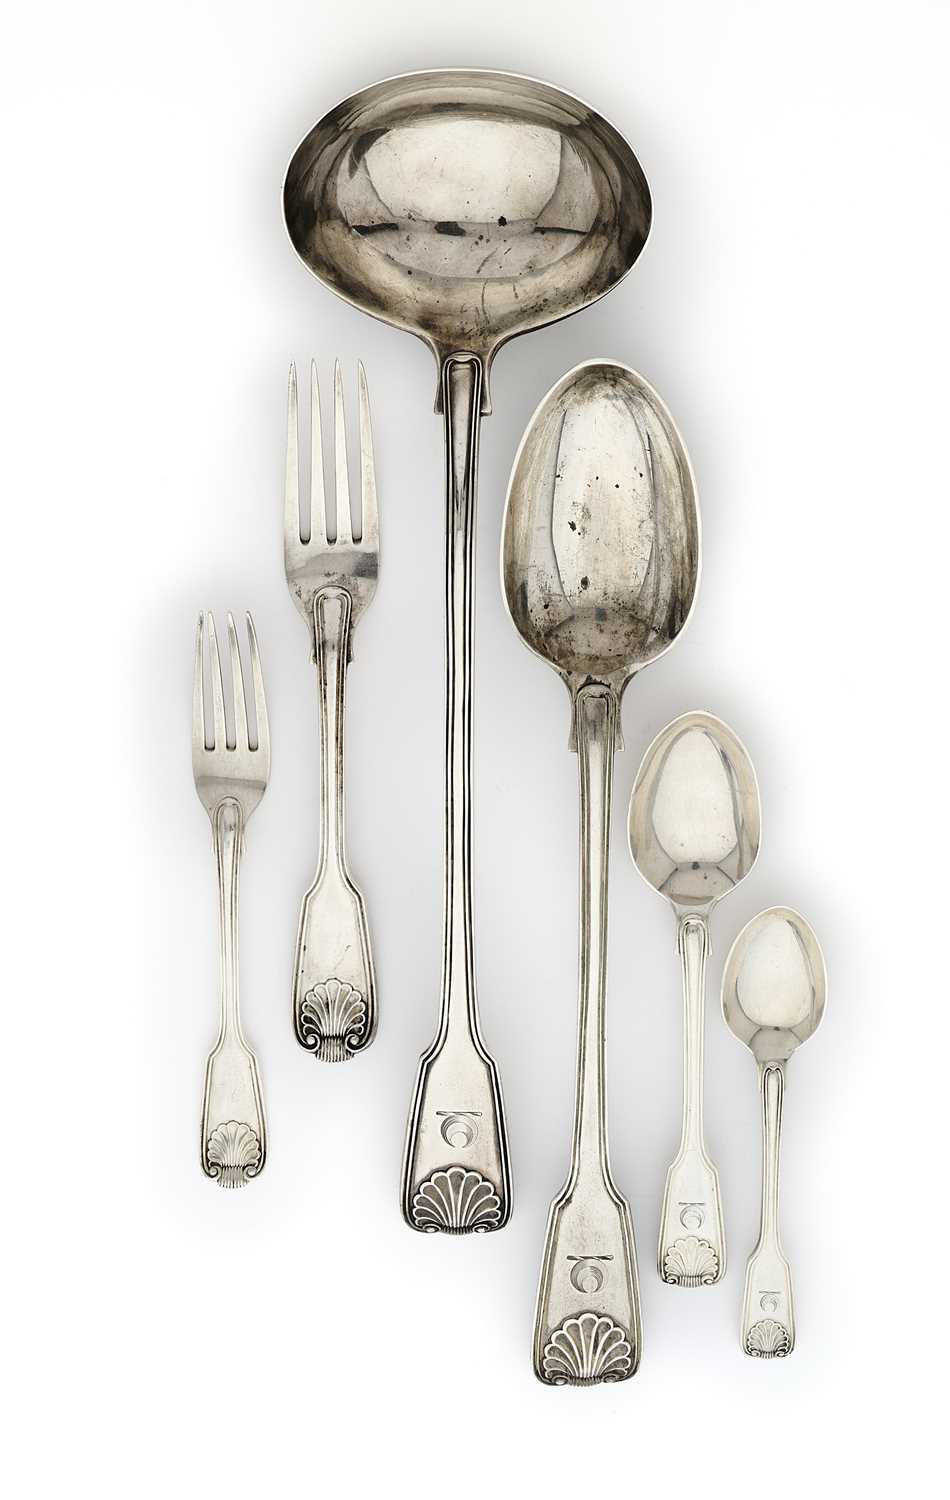 Lot 103 - A SET OF VICTORIAN TABLE SILVER, G.W. ADAMS FOR CHAWNER & CO., LONDON, 1844